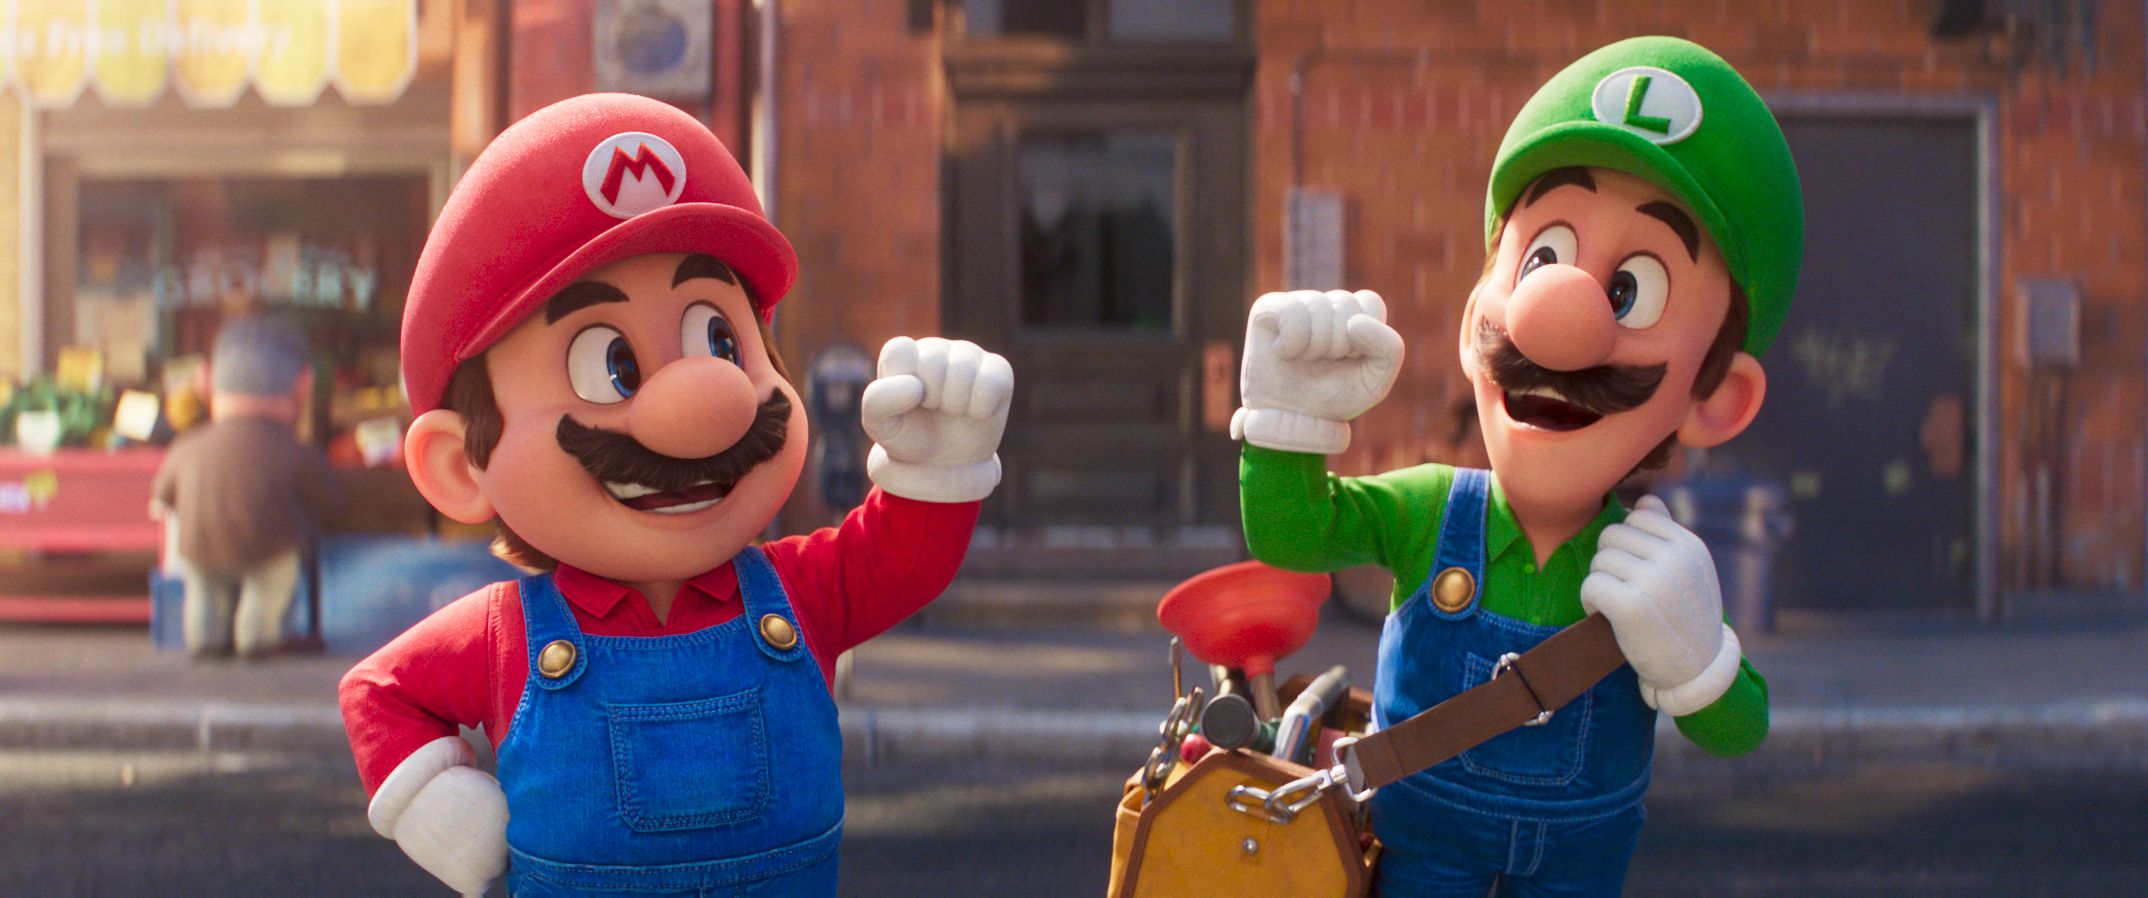 Super Mario Brothers 1986 movie debut is now available online  KMUW